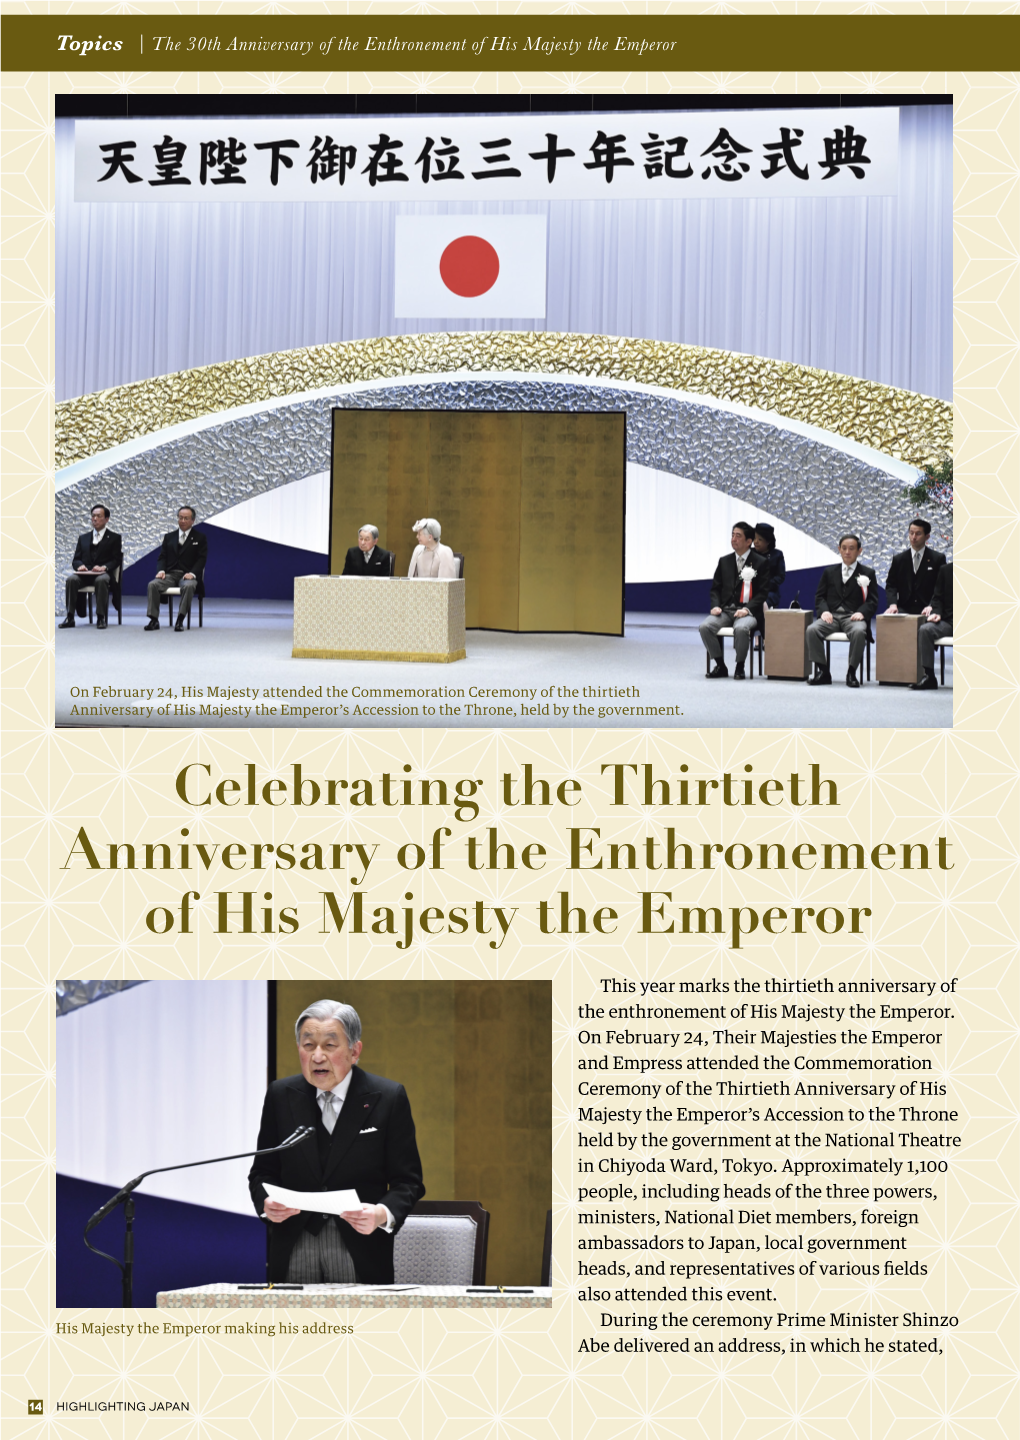 Celebrating the Thirtieth Anniversary of the Enthronement of His Majesty the Emperor